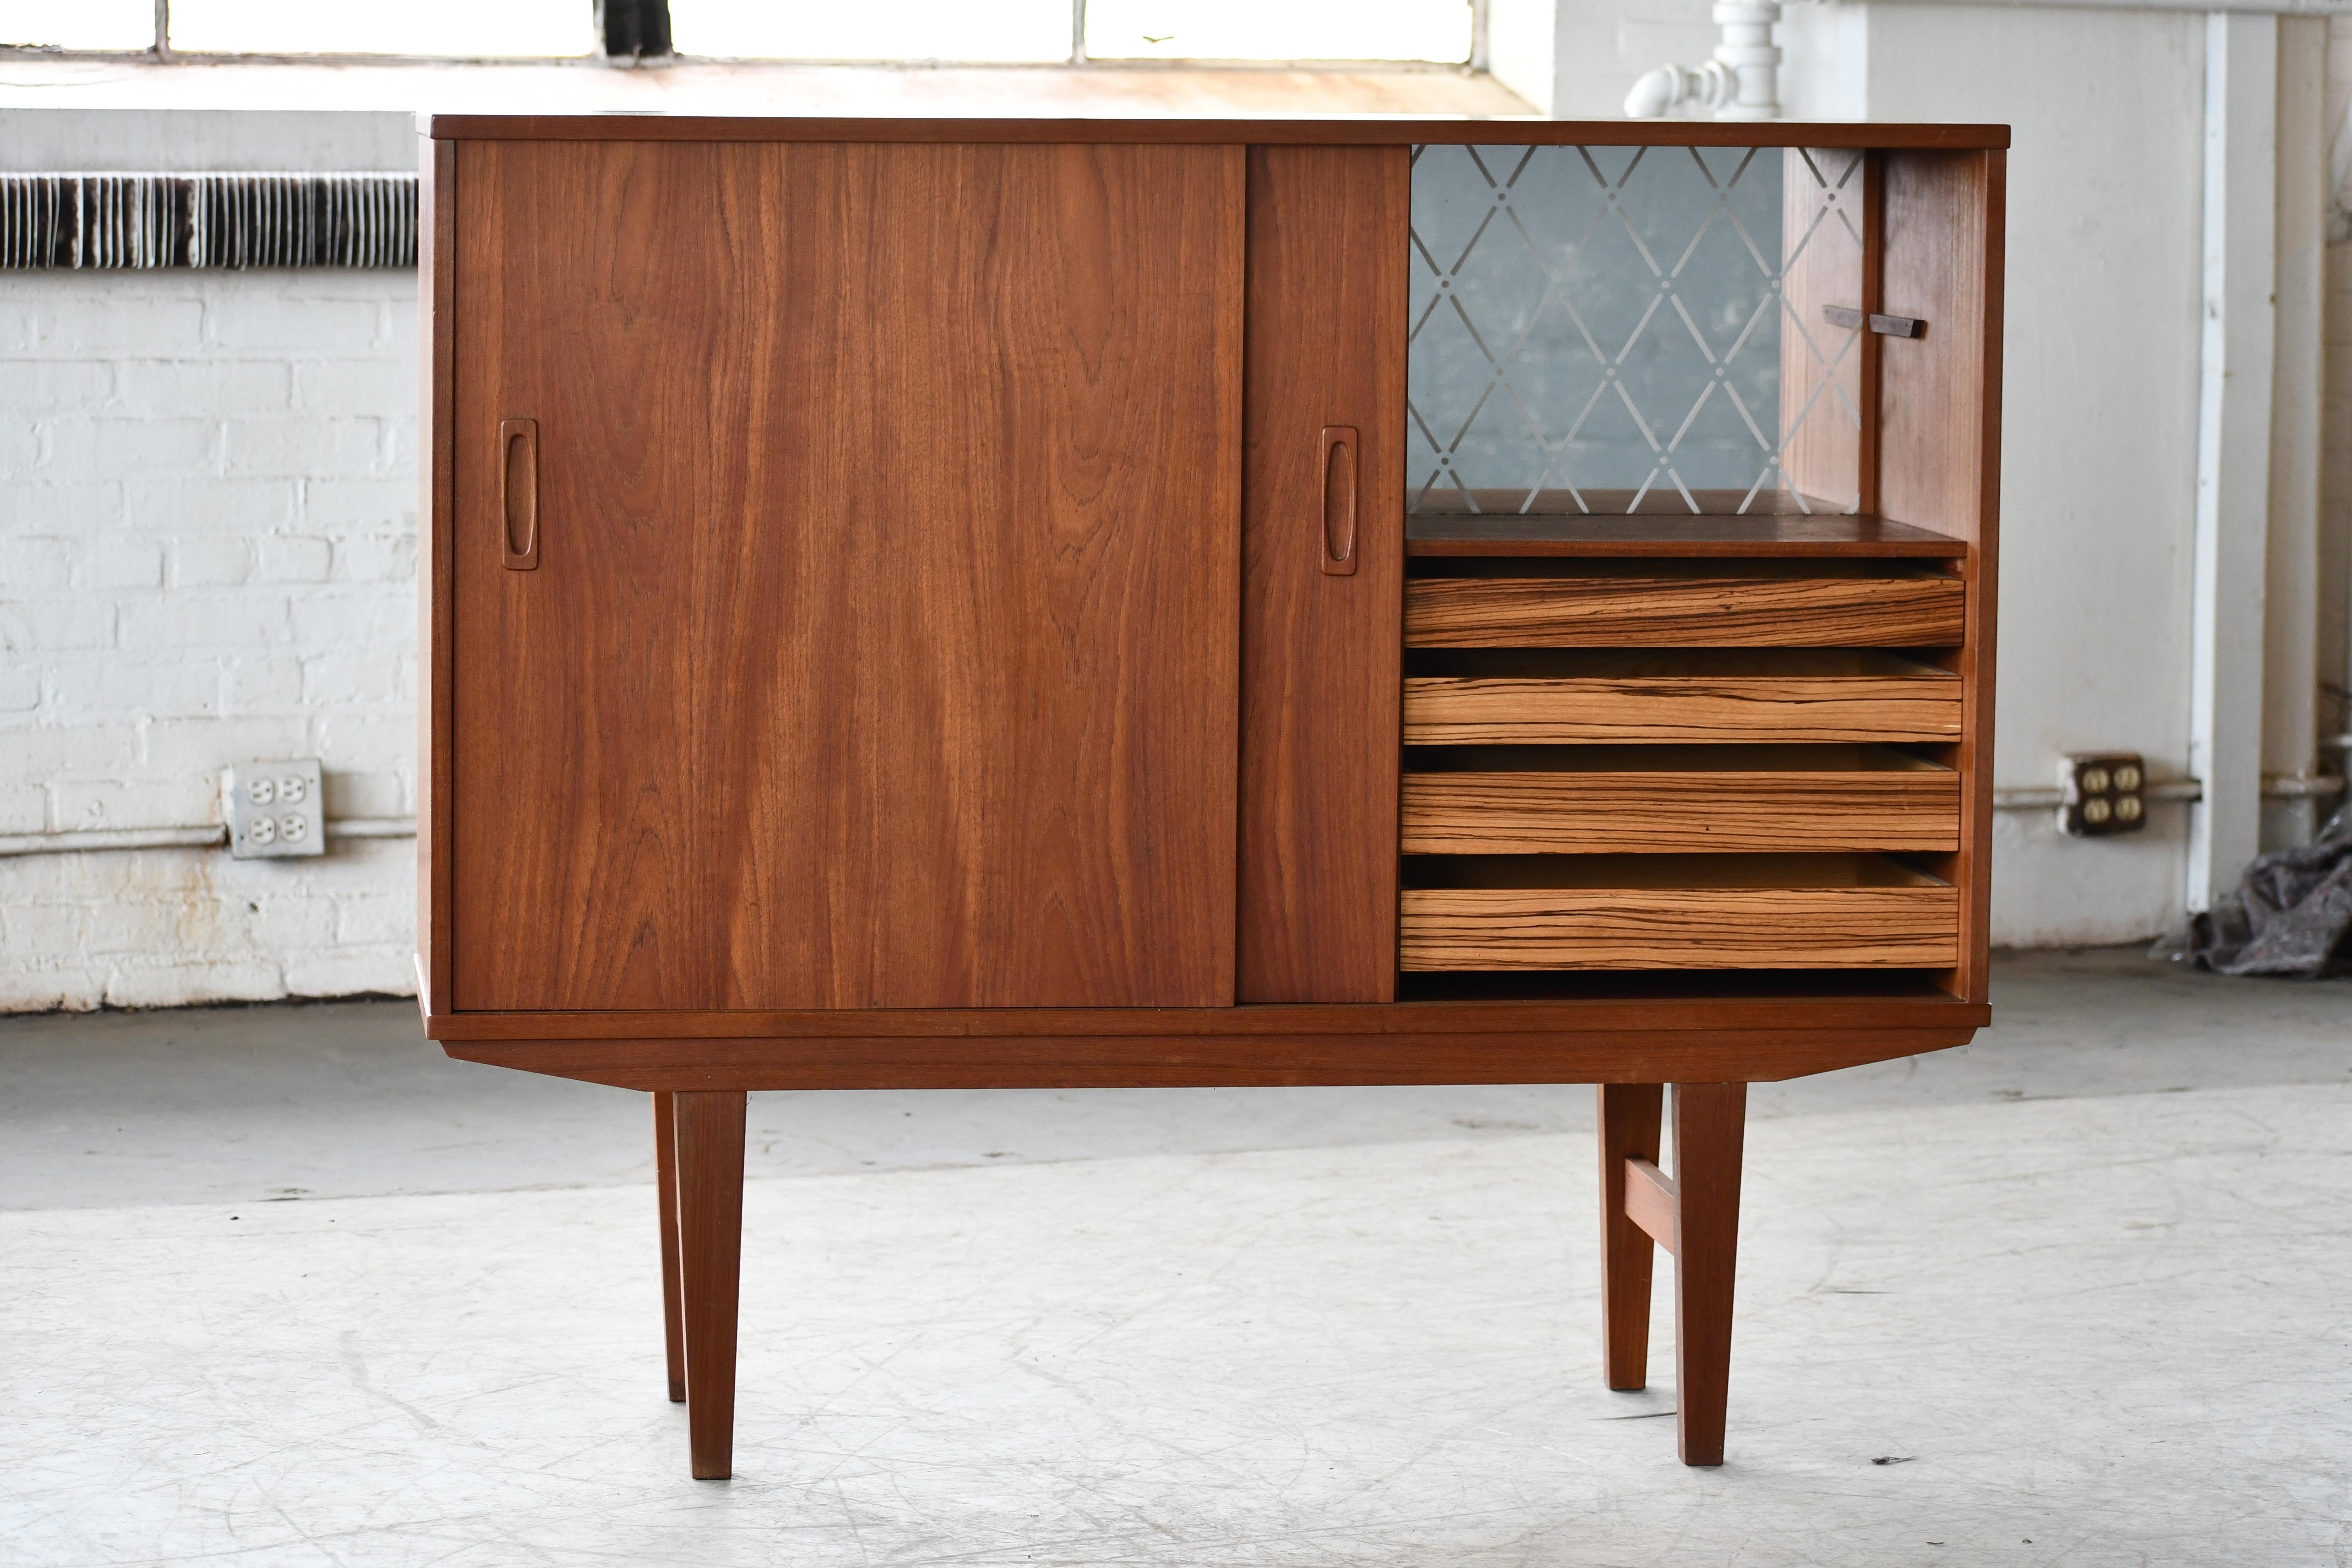 Danish 1960's Small Sideboard or Cabinet in Teak with Built-in-Bar In Good Condition For Sale In Bridgeport, CT